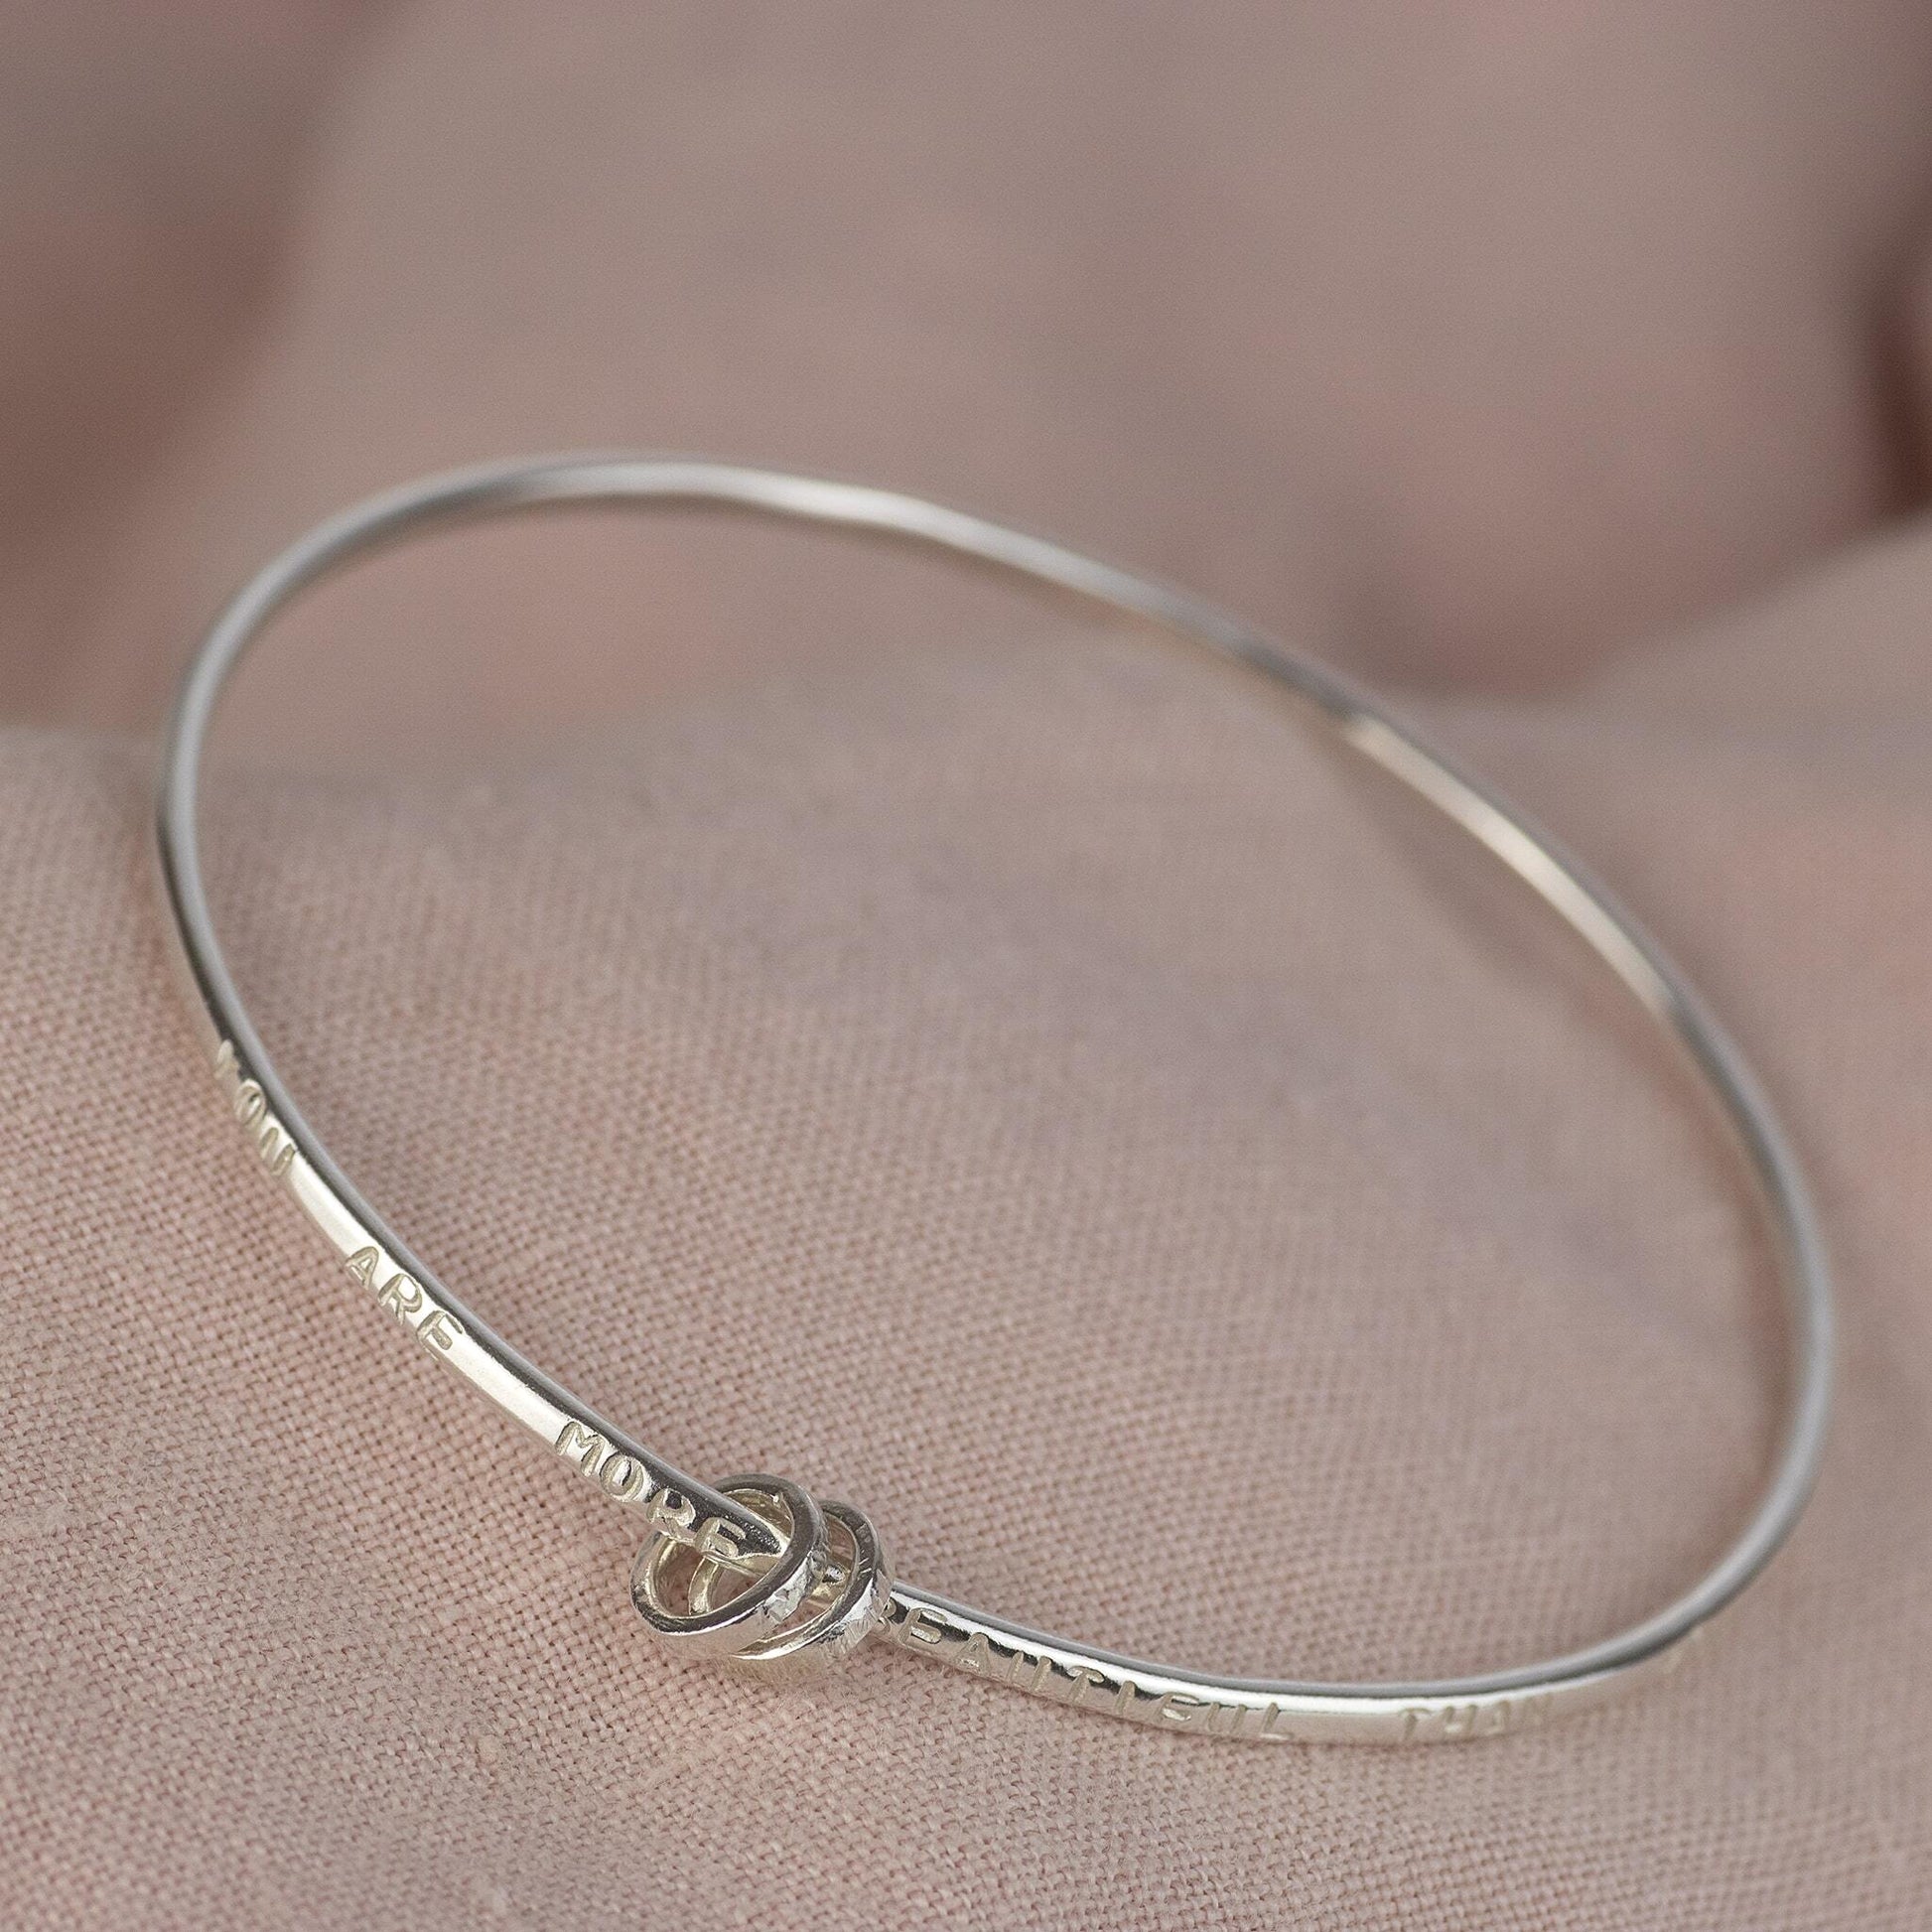 Personalised Family Links Bangle - 2 Links for 2 Loved Ones